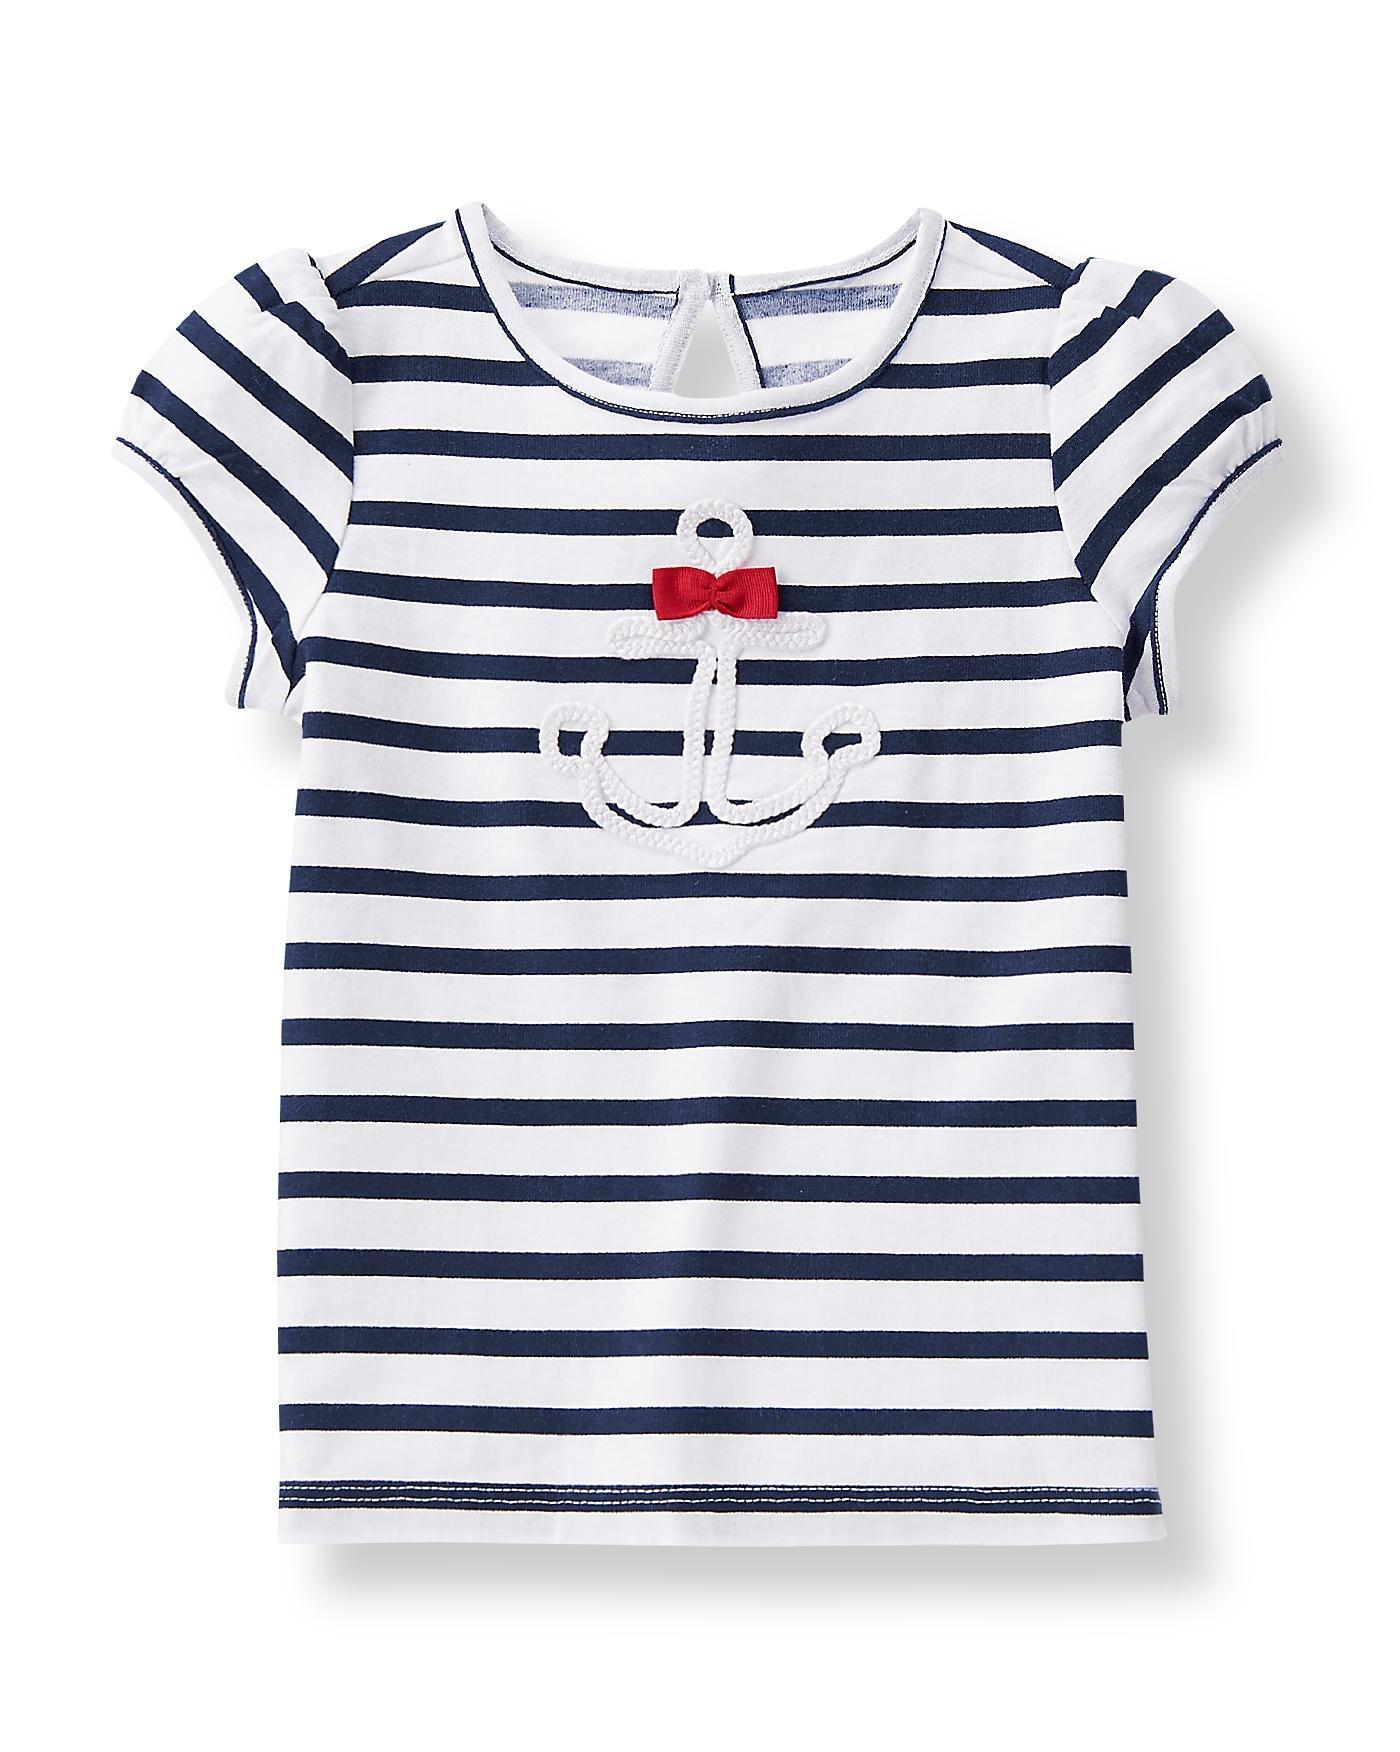 Anchor Striped Tee image number 0